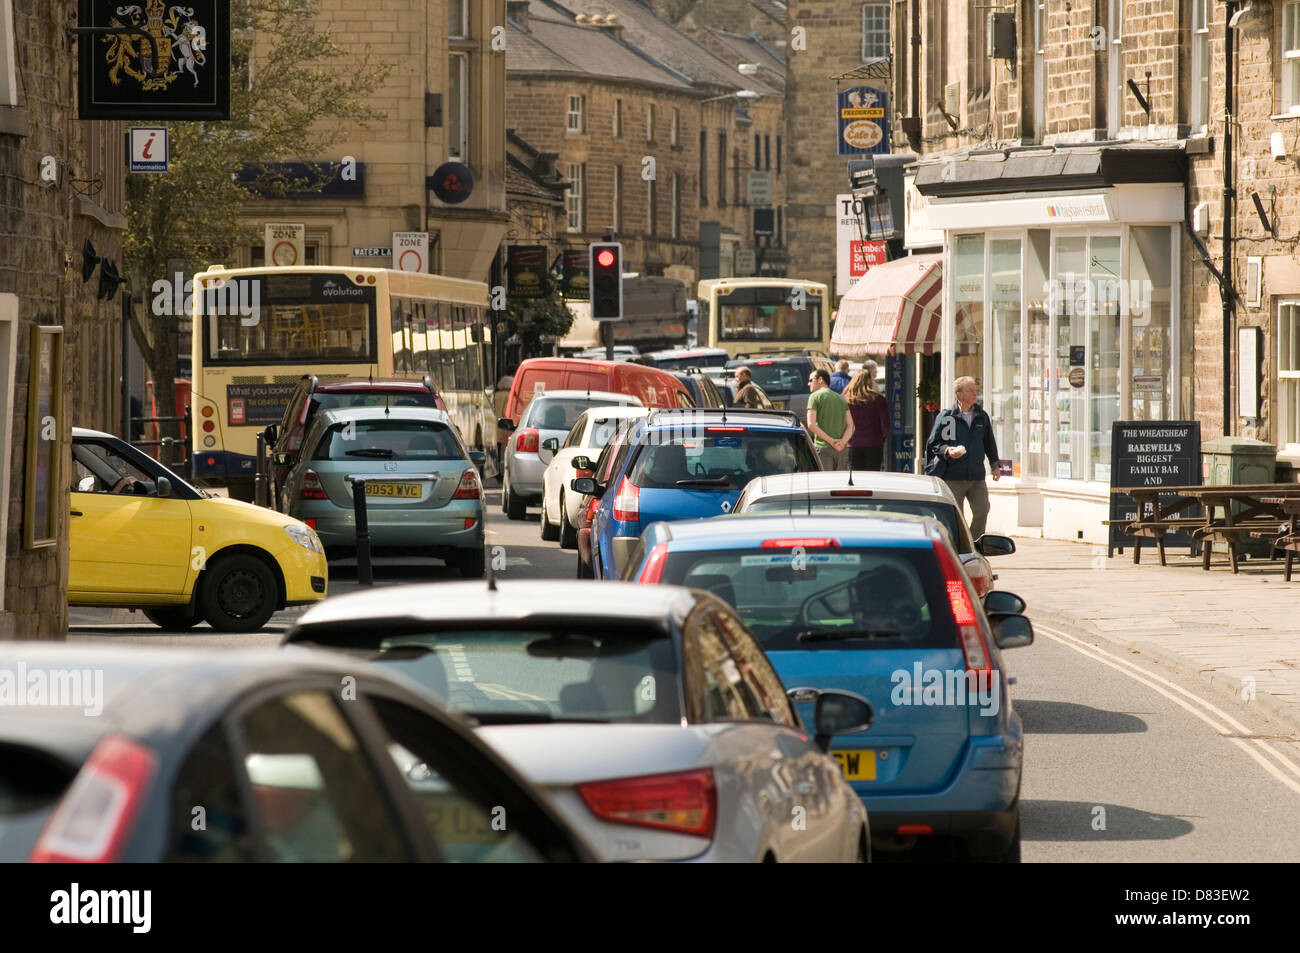 traffic jam jams in english old town bakewell heavy congestion congested village uk Derbyshire dales car cars stuck in trafficja Stock Photo